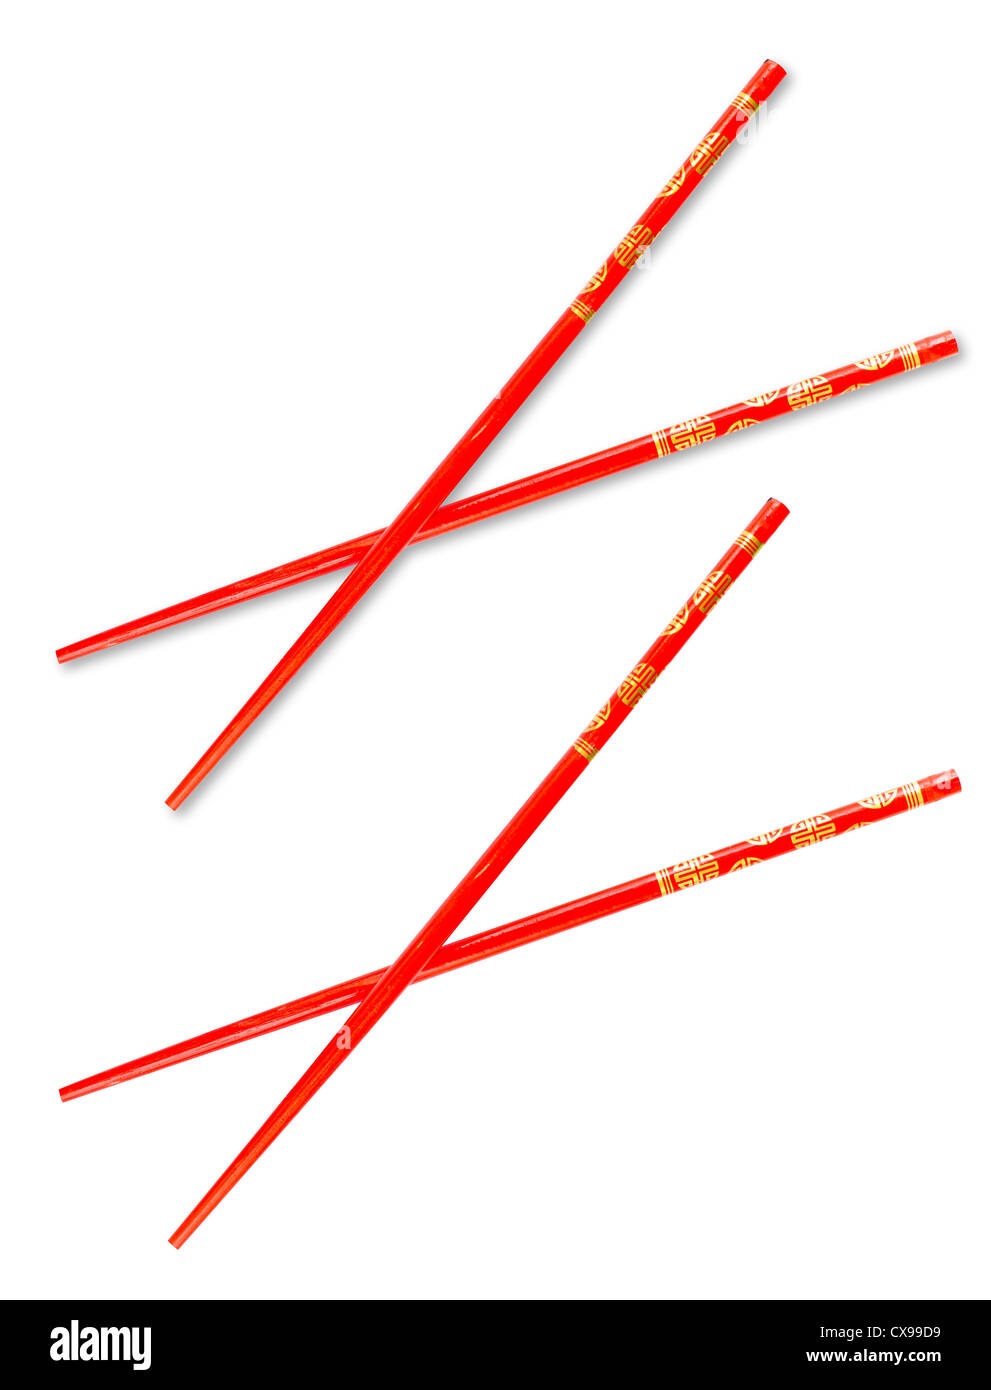 Pair of red chopsticks isolated on white with clipping path included Stock Photo